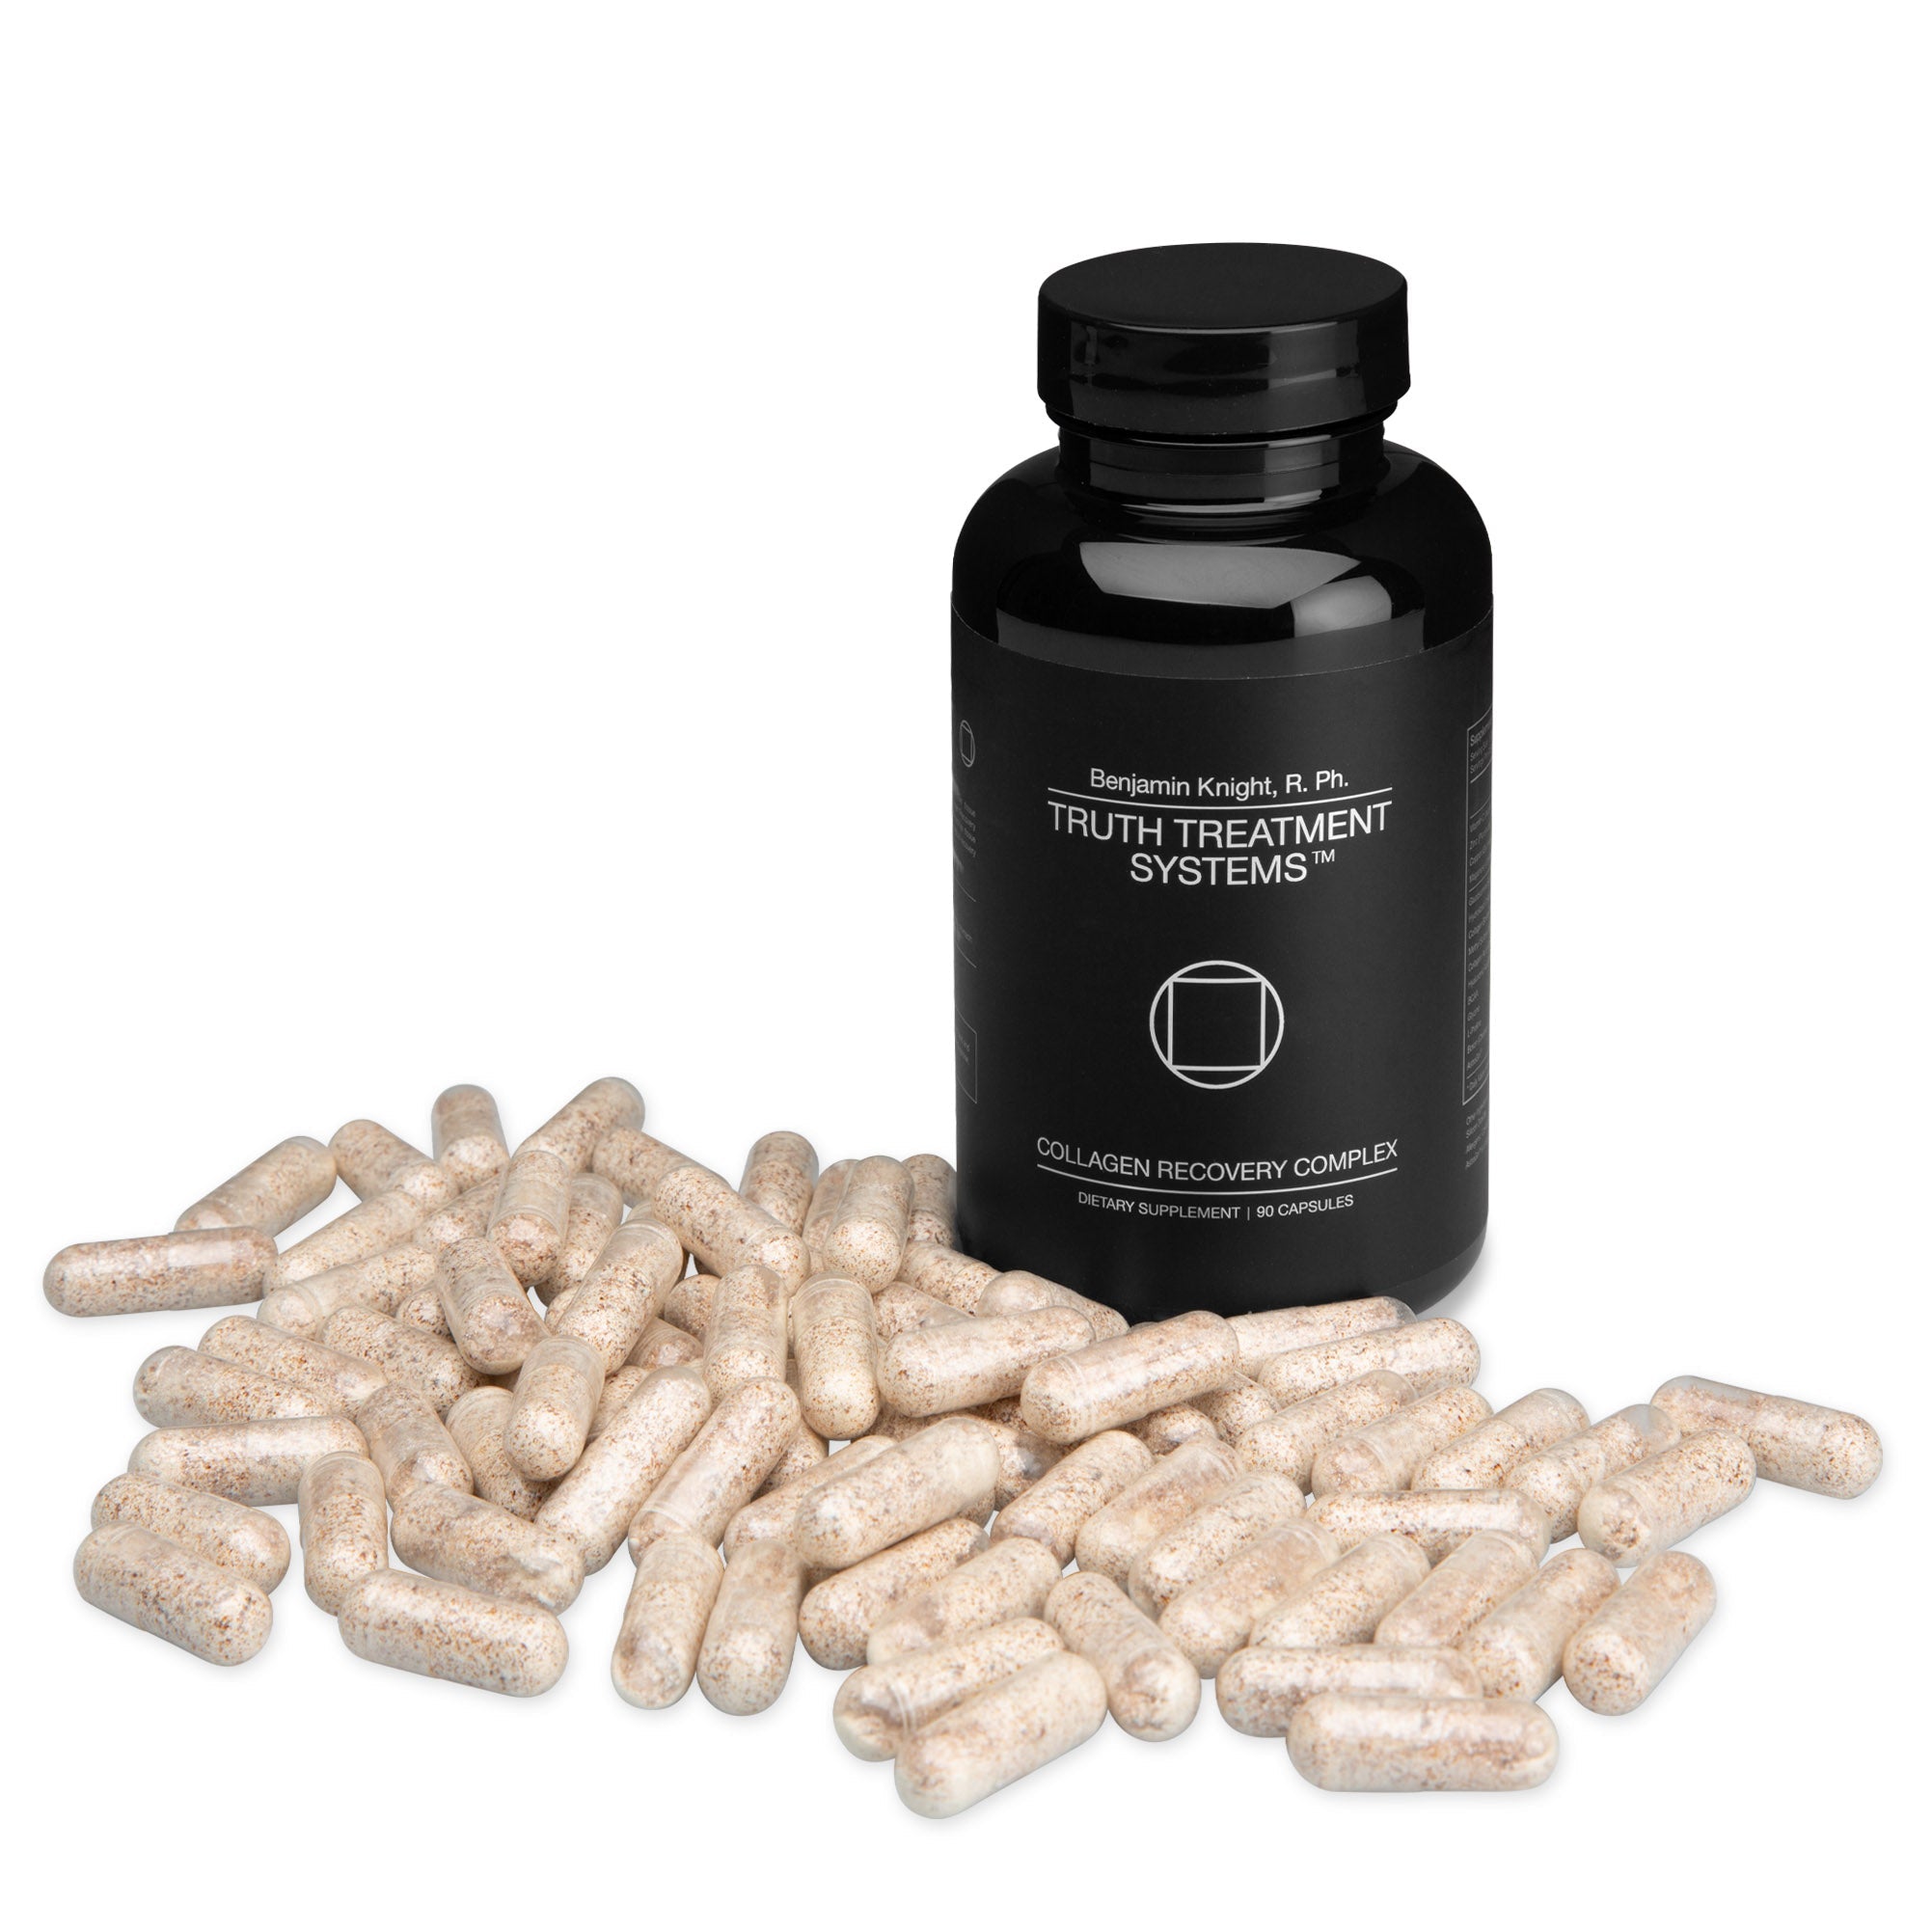 Collagen Recovery Complex (90 Capsules)